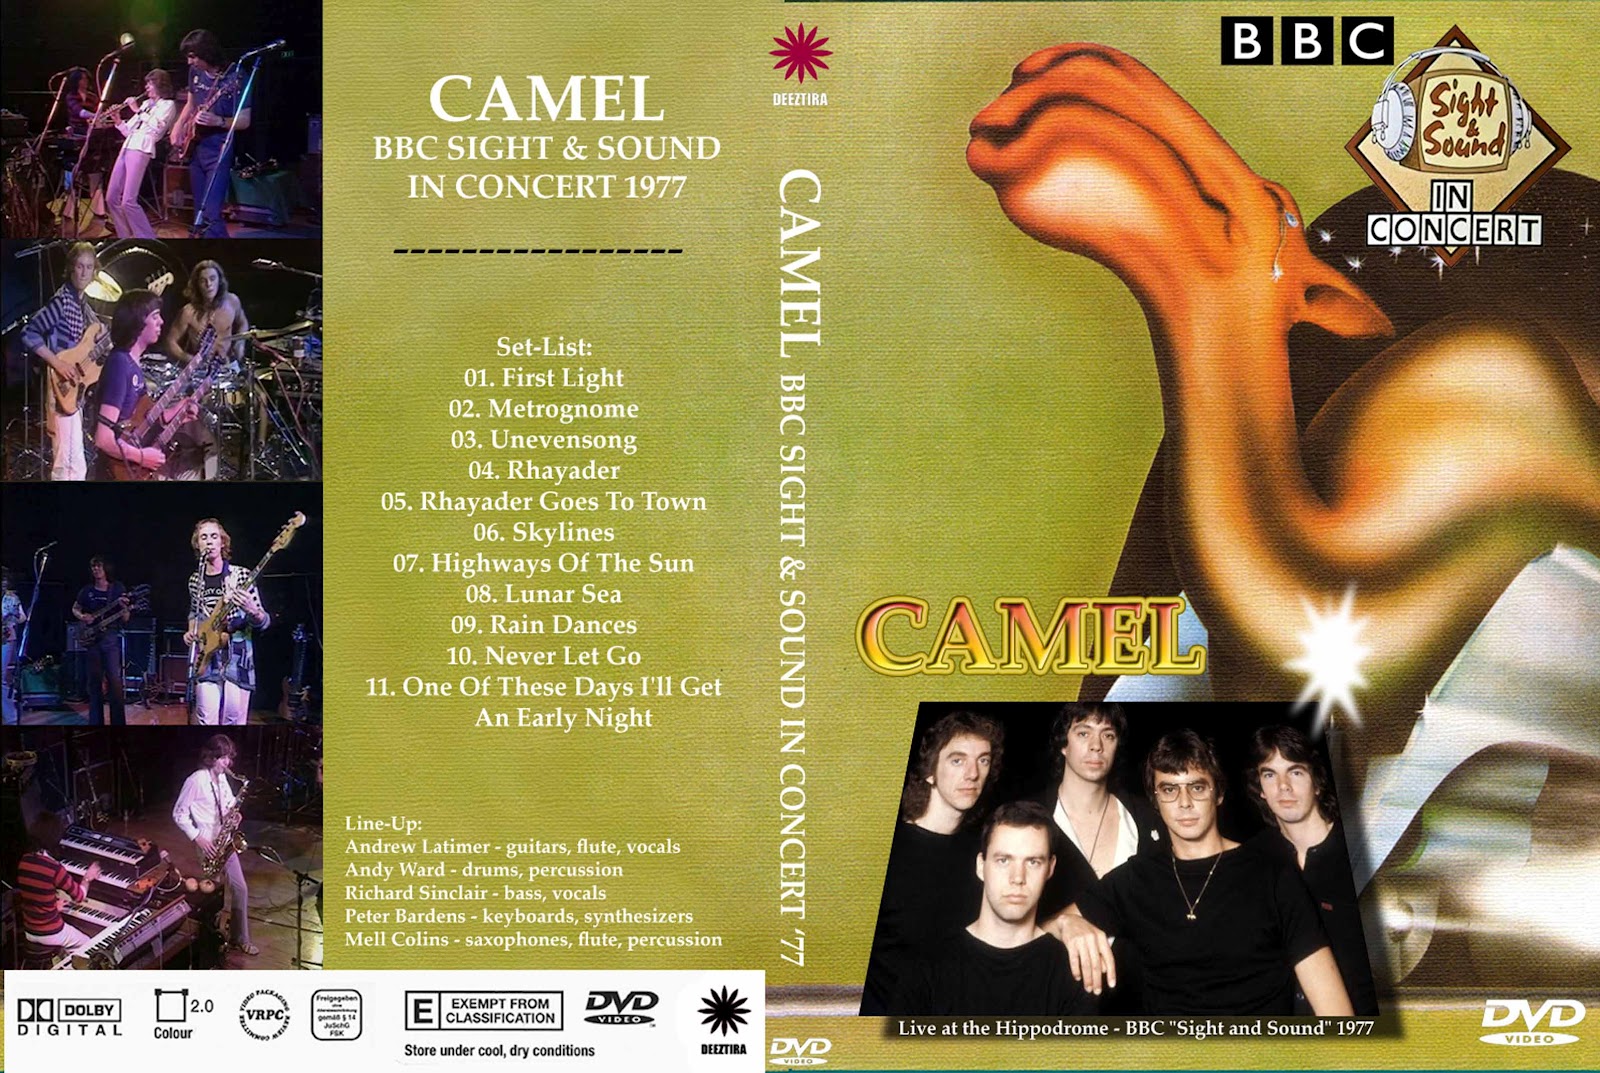 YOUDISCOLL: Camel - BBC Sight and Sound Concert 19771600 x 1073